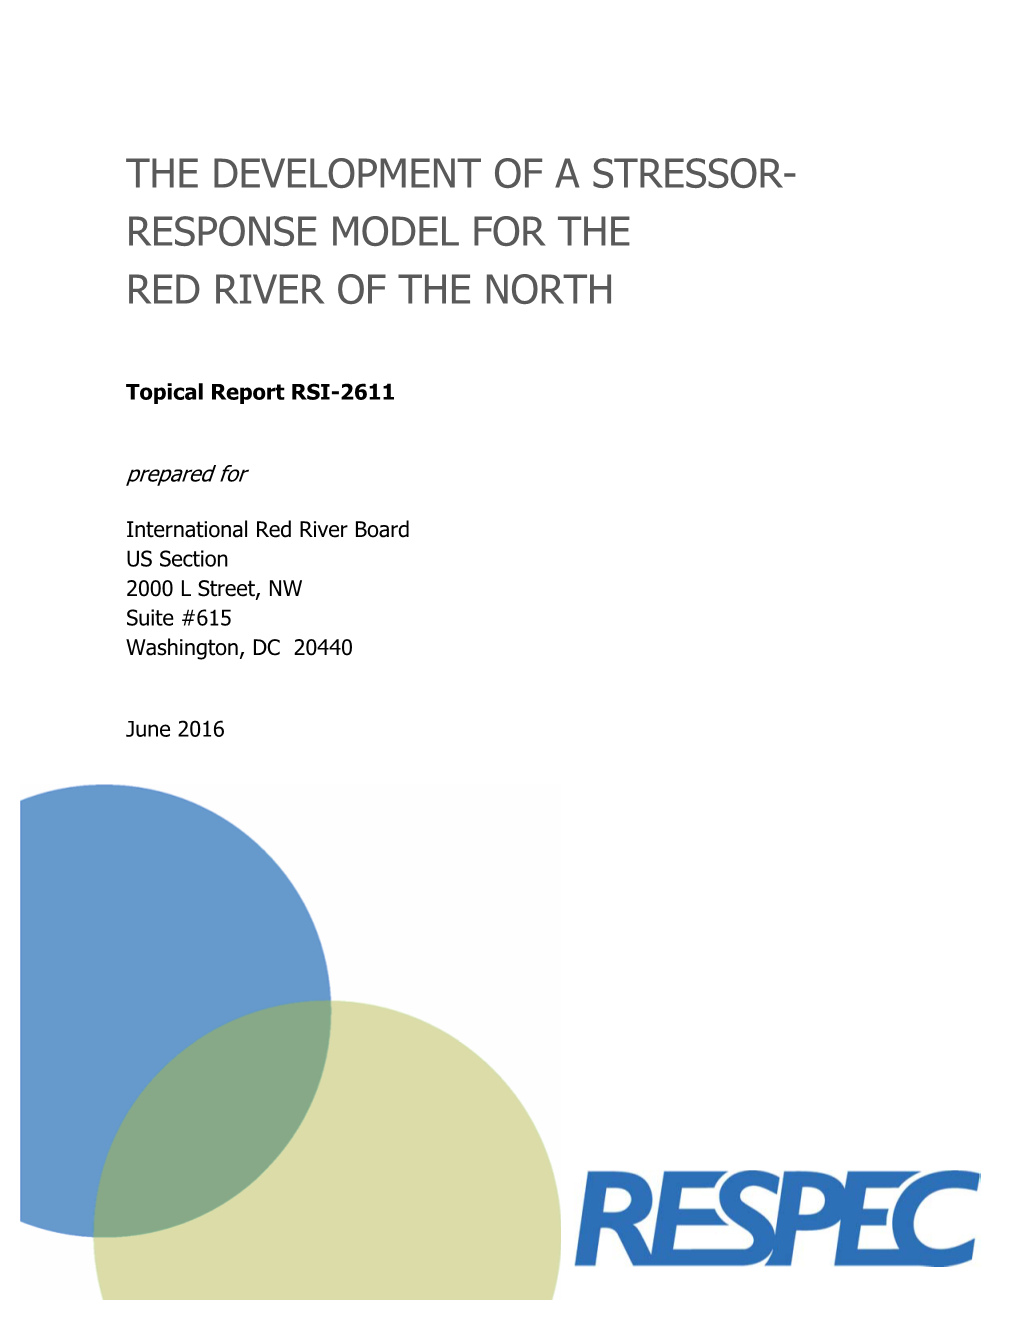 The Development of a Stressor- Response Model for the Red River of the North